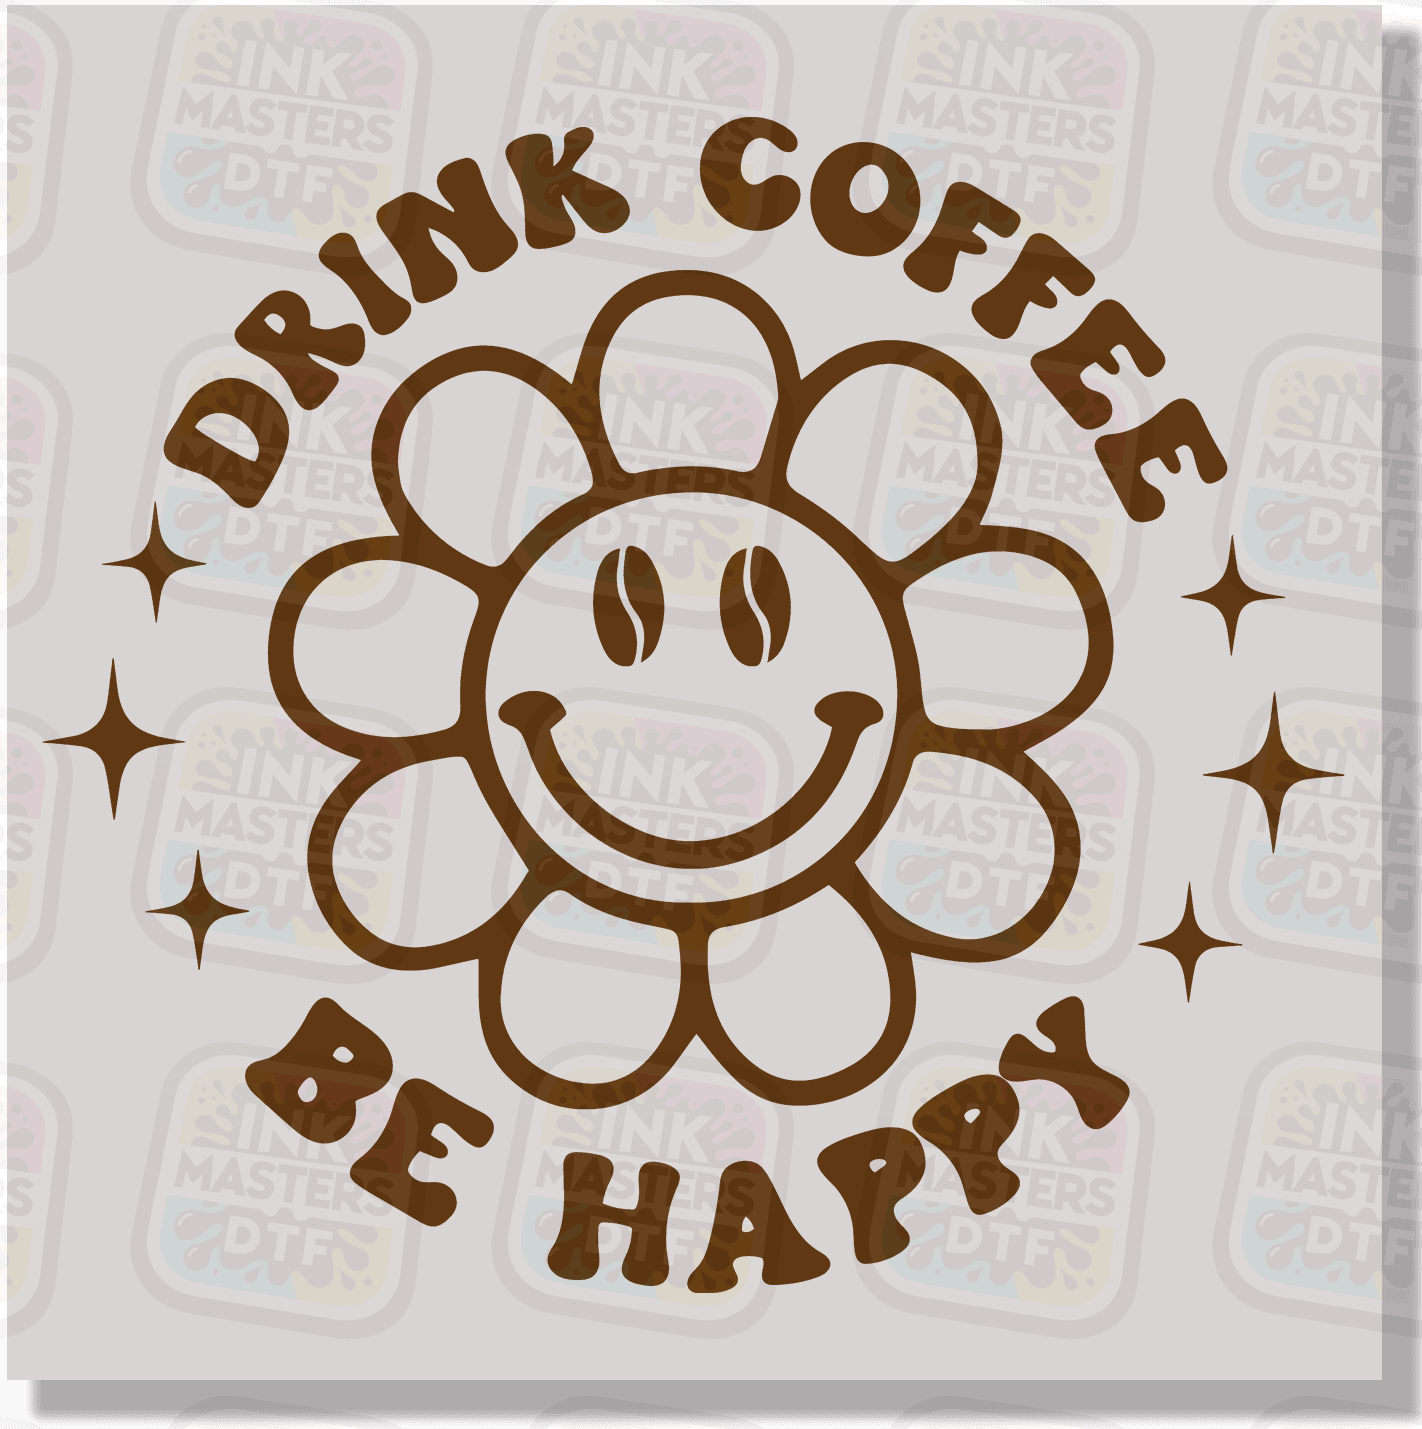 Drink Coffee Be Happy DTF Transfer - Ink Masters DTF